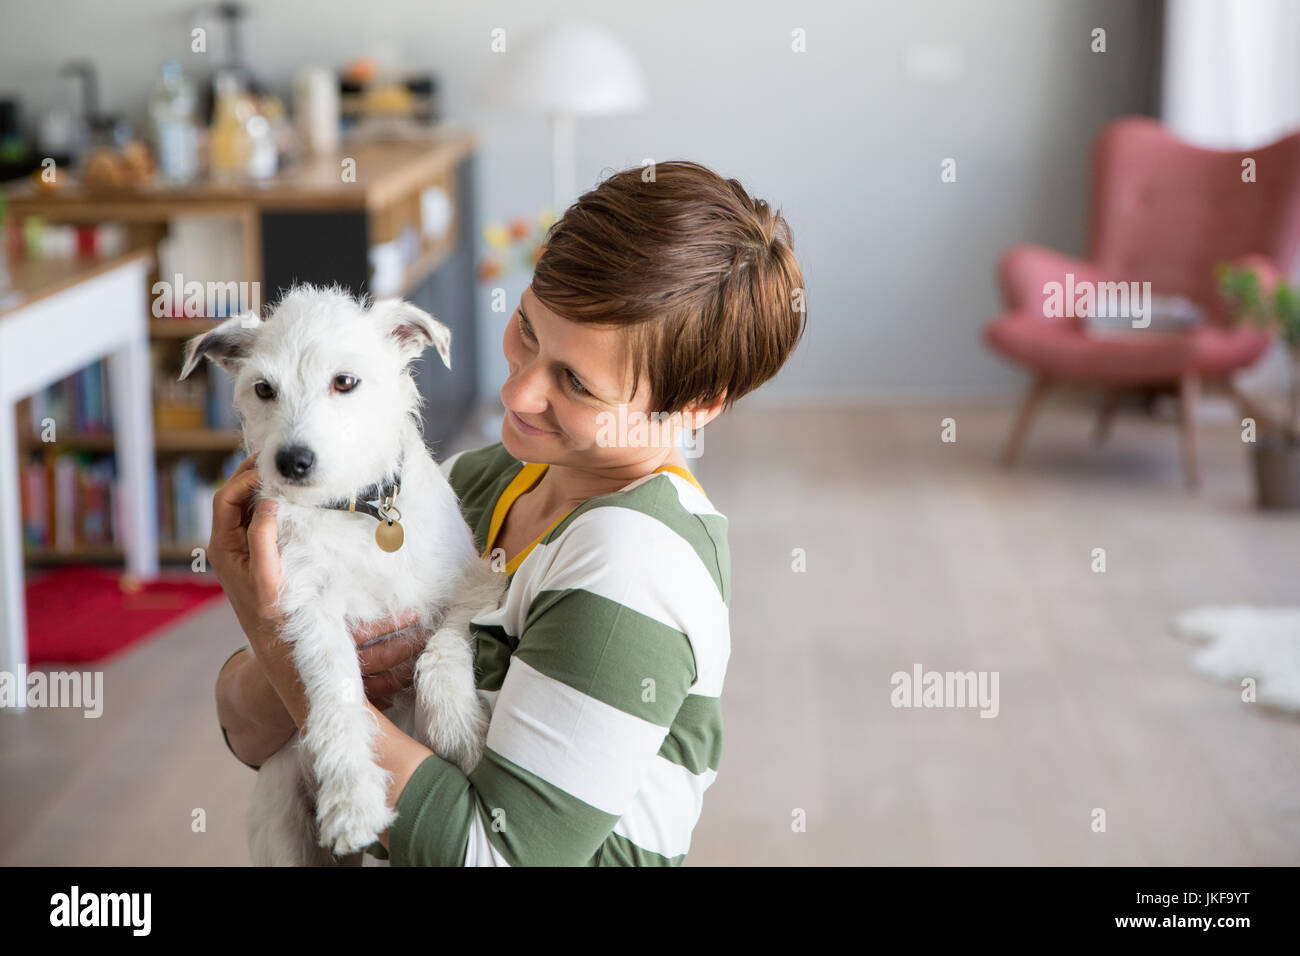 Woman holding dog on her arms at home Stock Photo